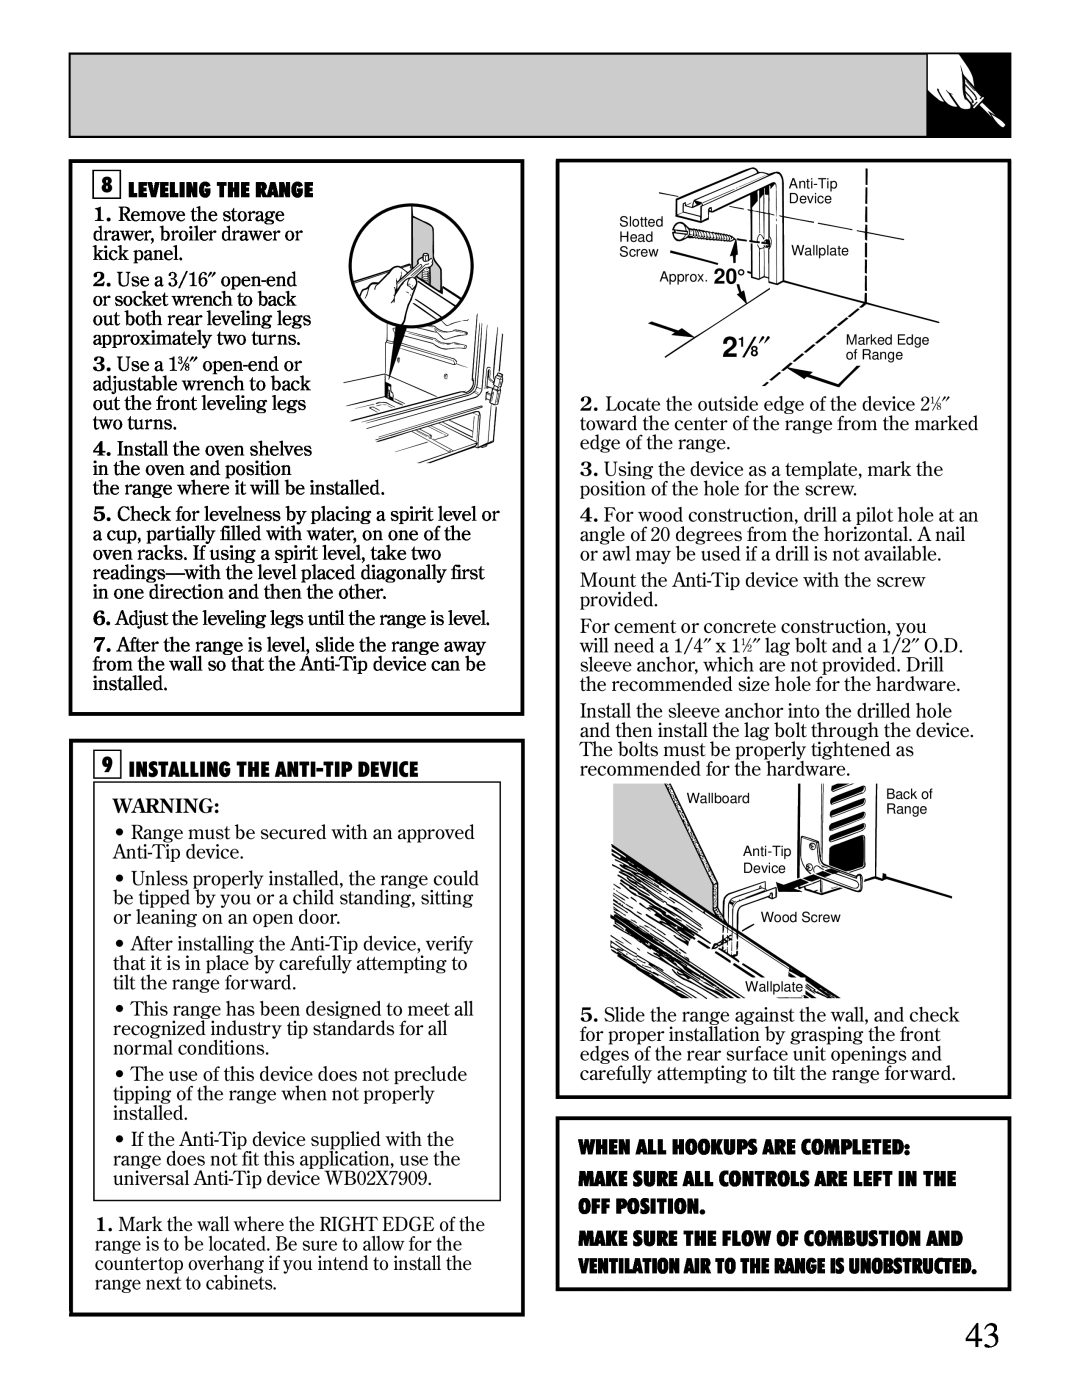 Hotpoint RGB744 installation instructions 21⁄8″, 8LEVELING THE RANGE, Installing The Anti-Tipdevice 